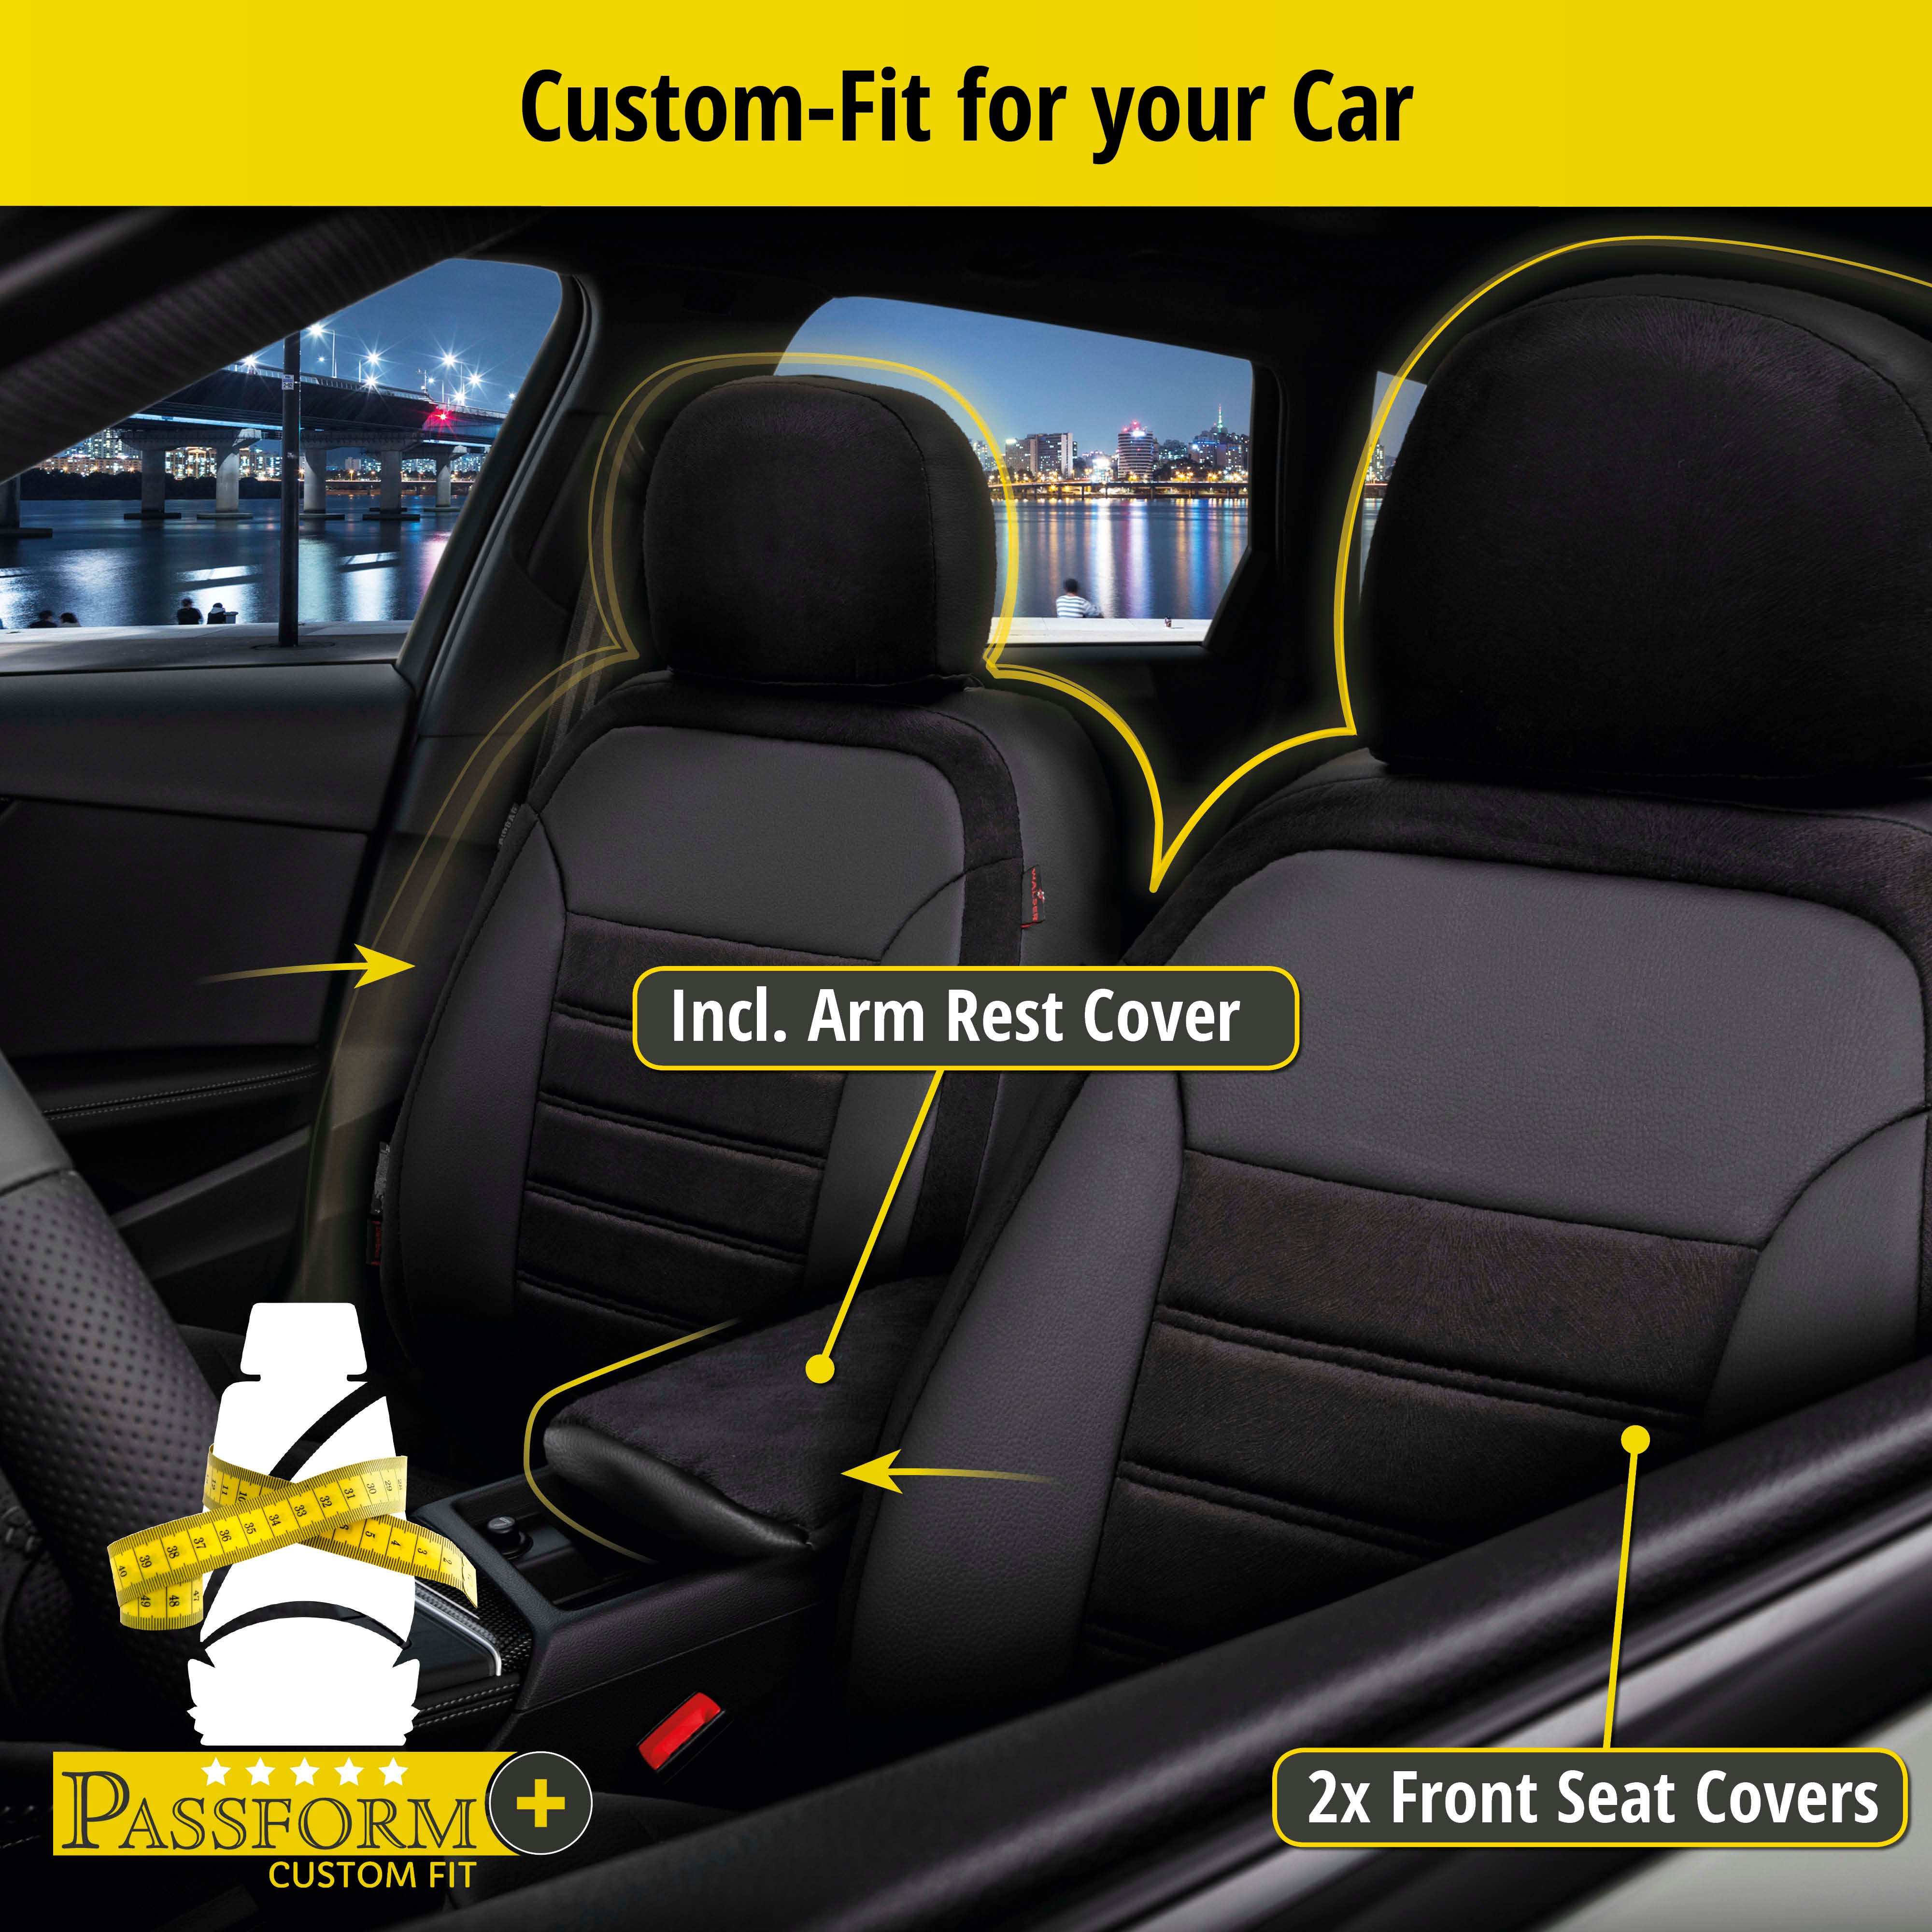 Seat Cover Bari for Dacia Lodgy (JS) 03/2012-Today, 2 seat covers for normal seats